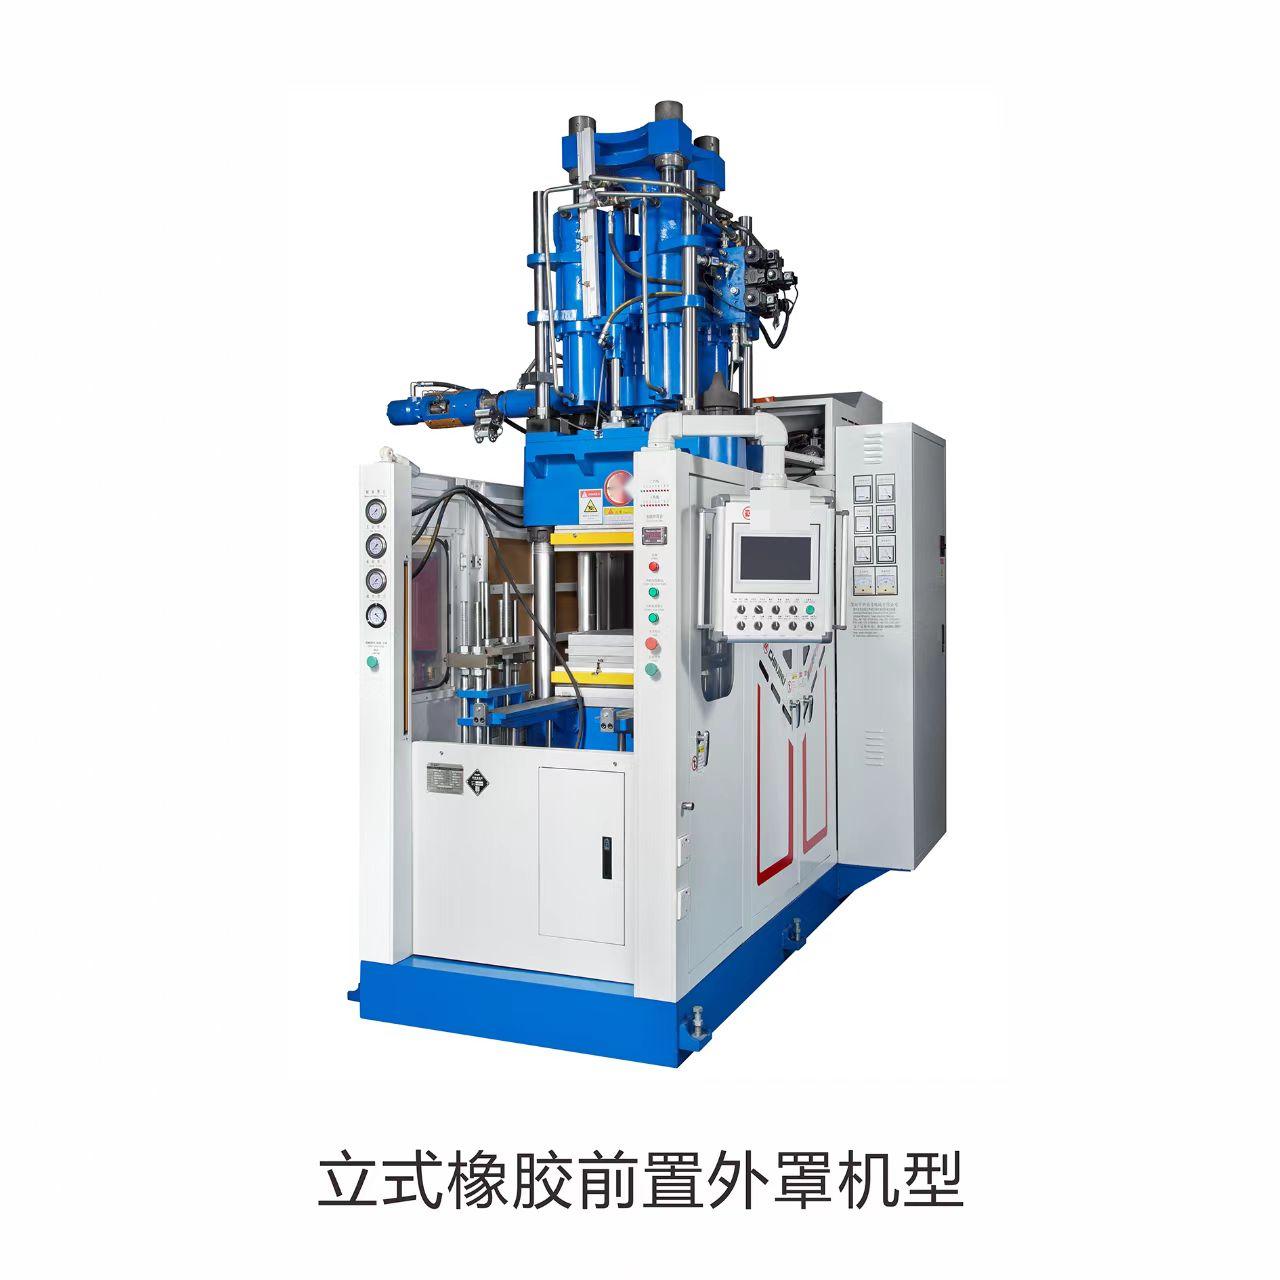 Vertical rubber injection molding machine feature